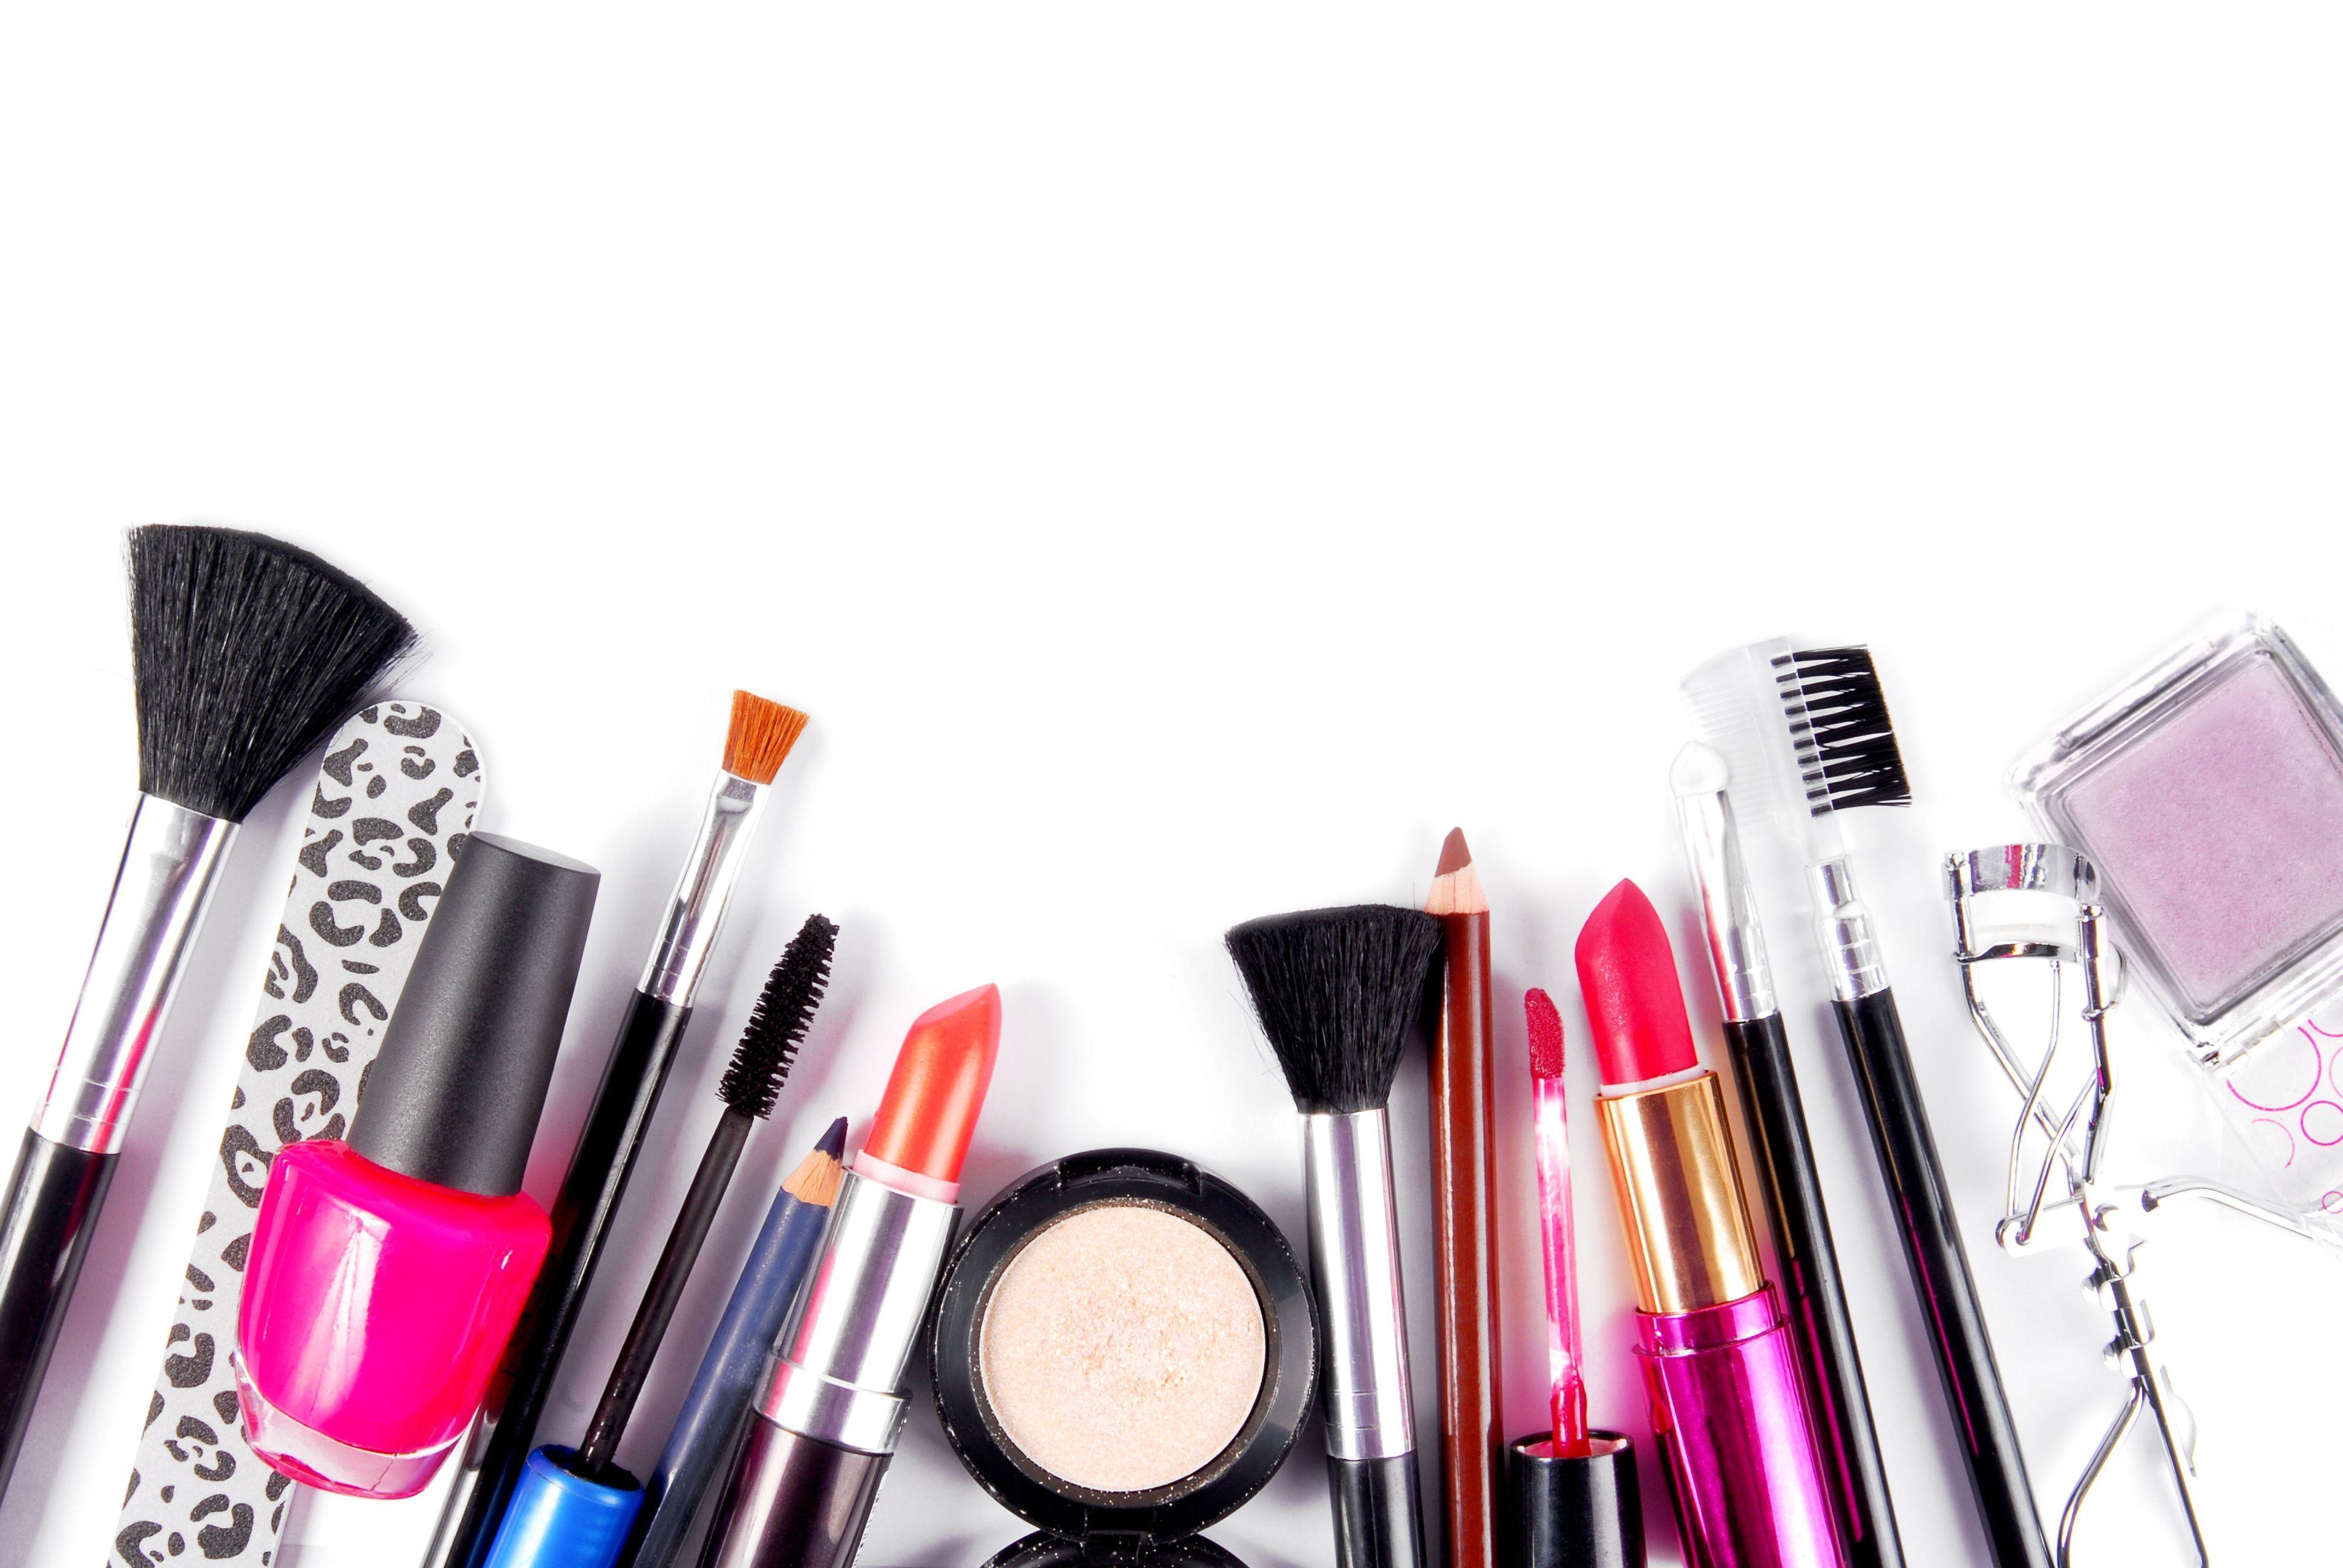 Makeup Product Wallpaper Android, Other Wallpaper